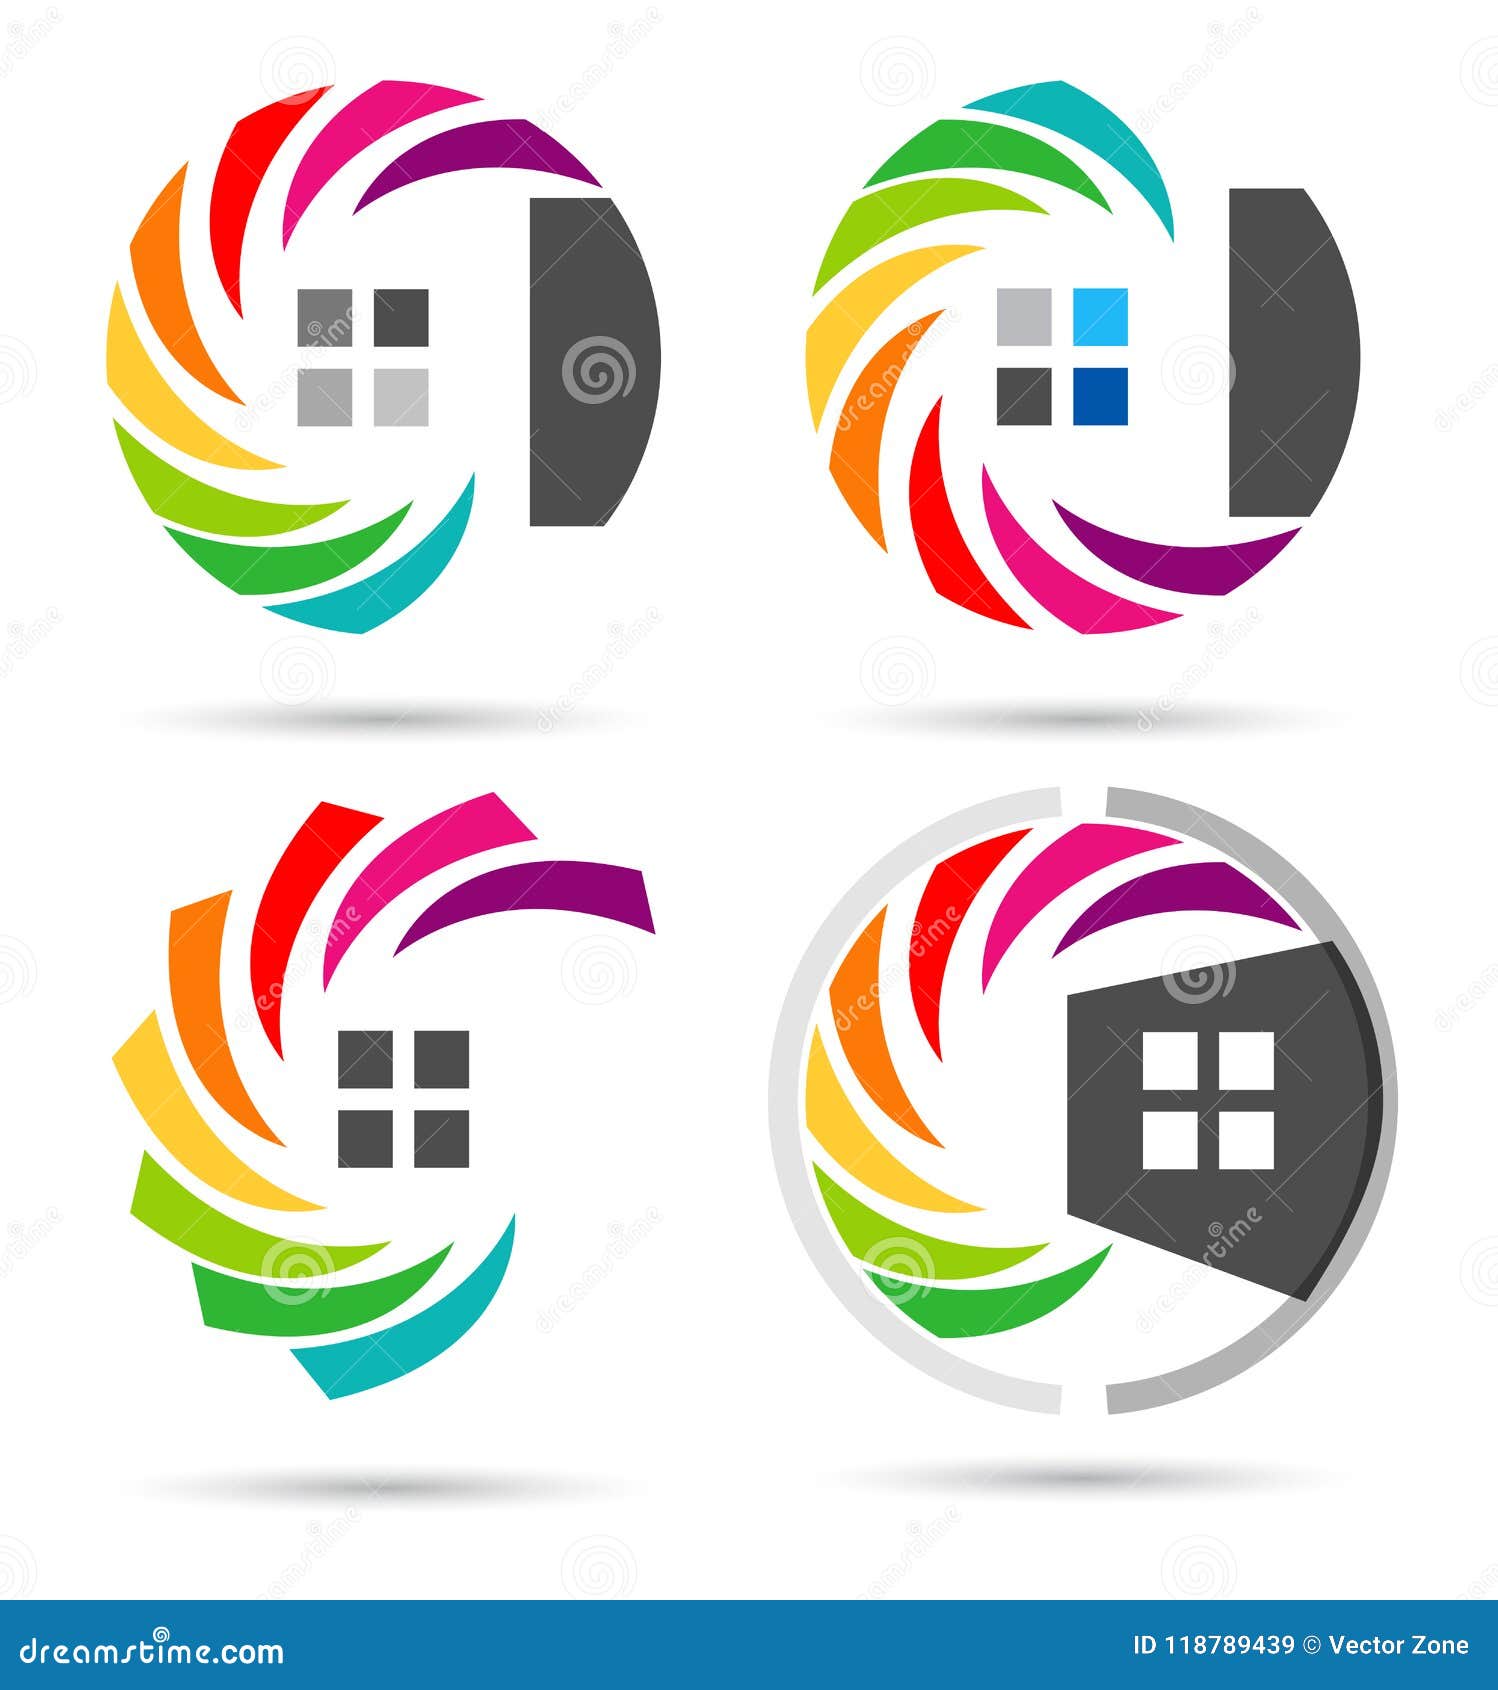 house, real estate, circle home, logo, set of rainbow colorize building  icon  